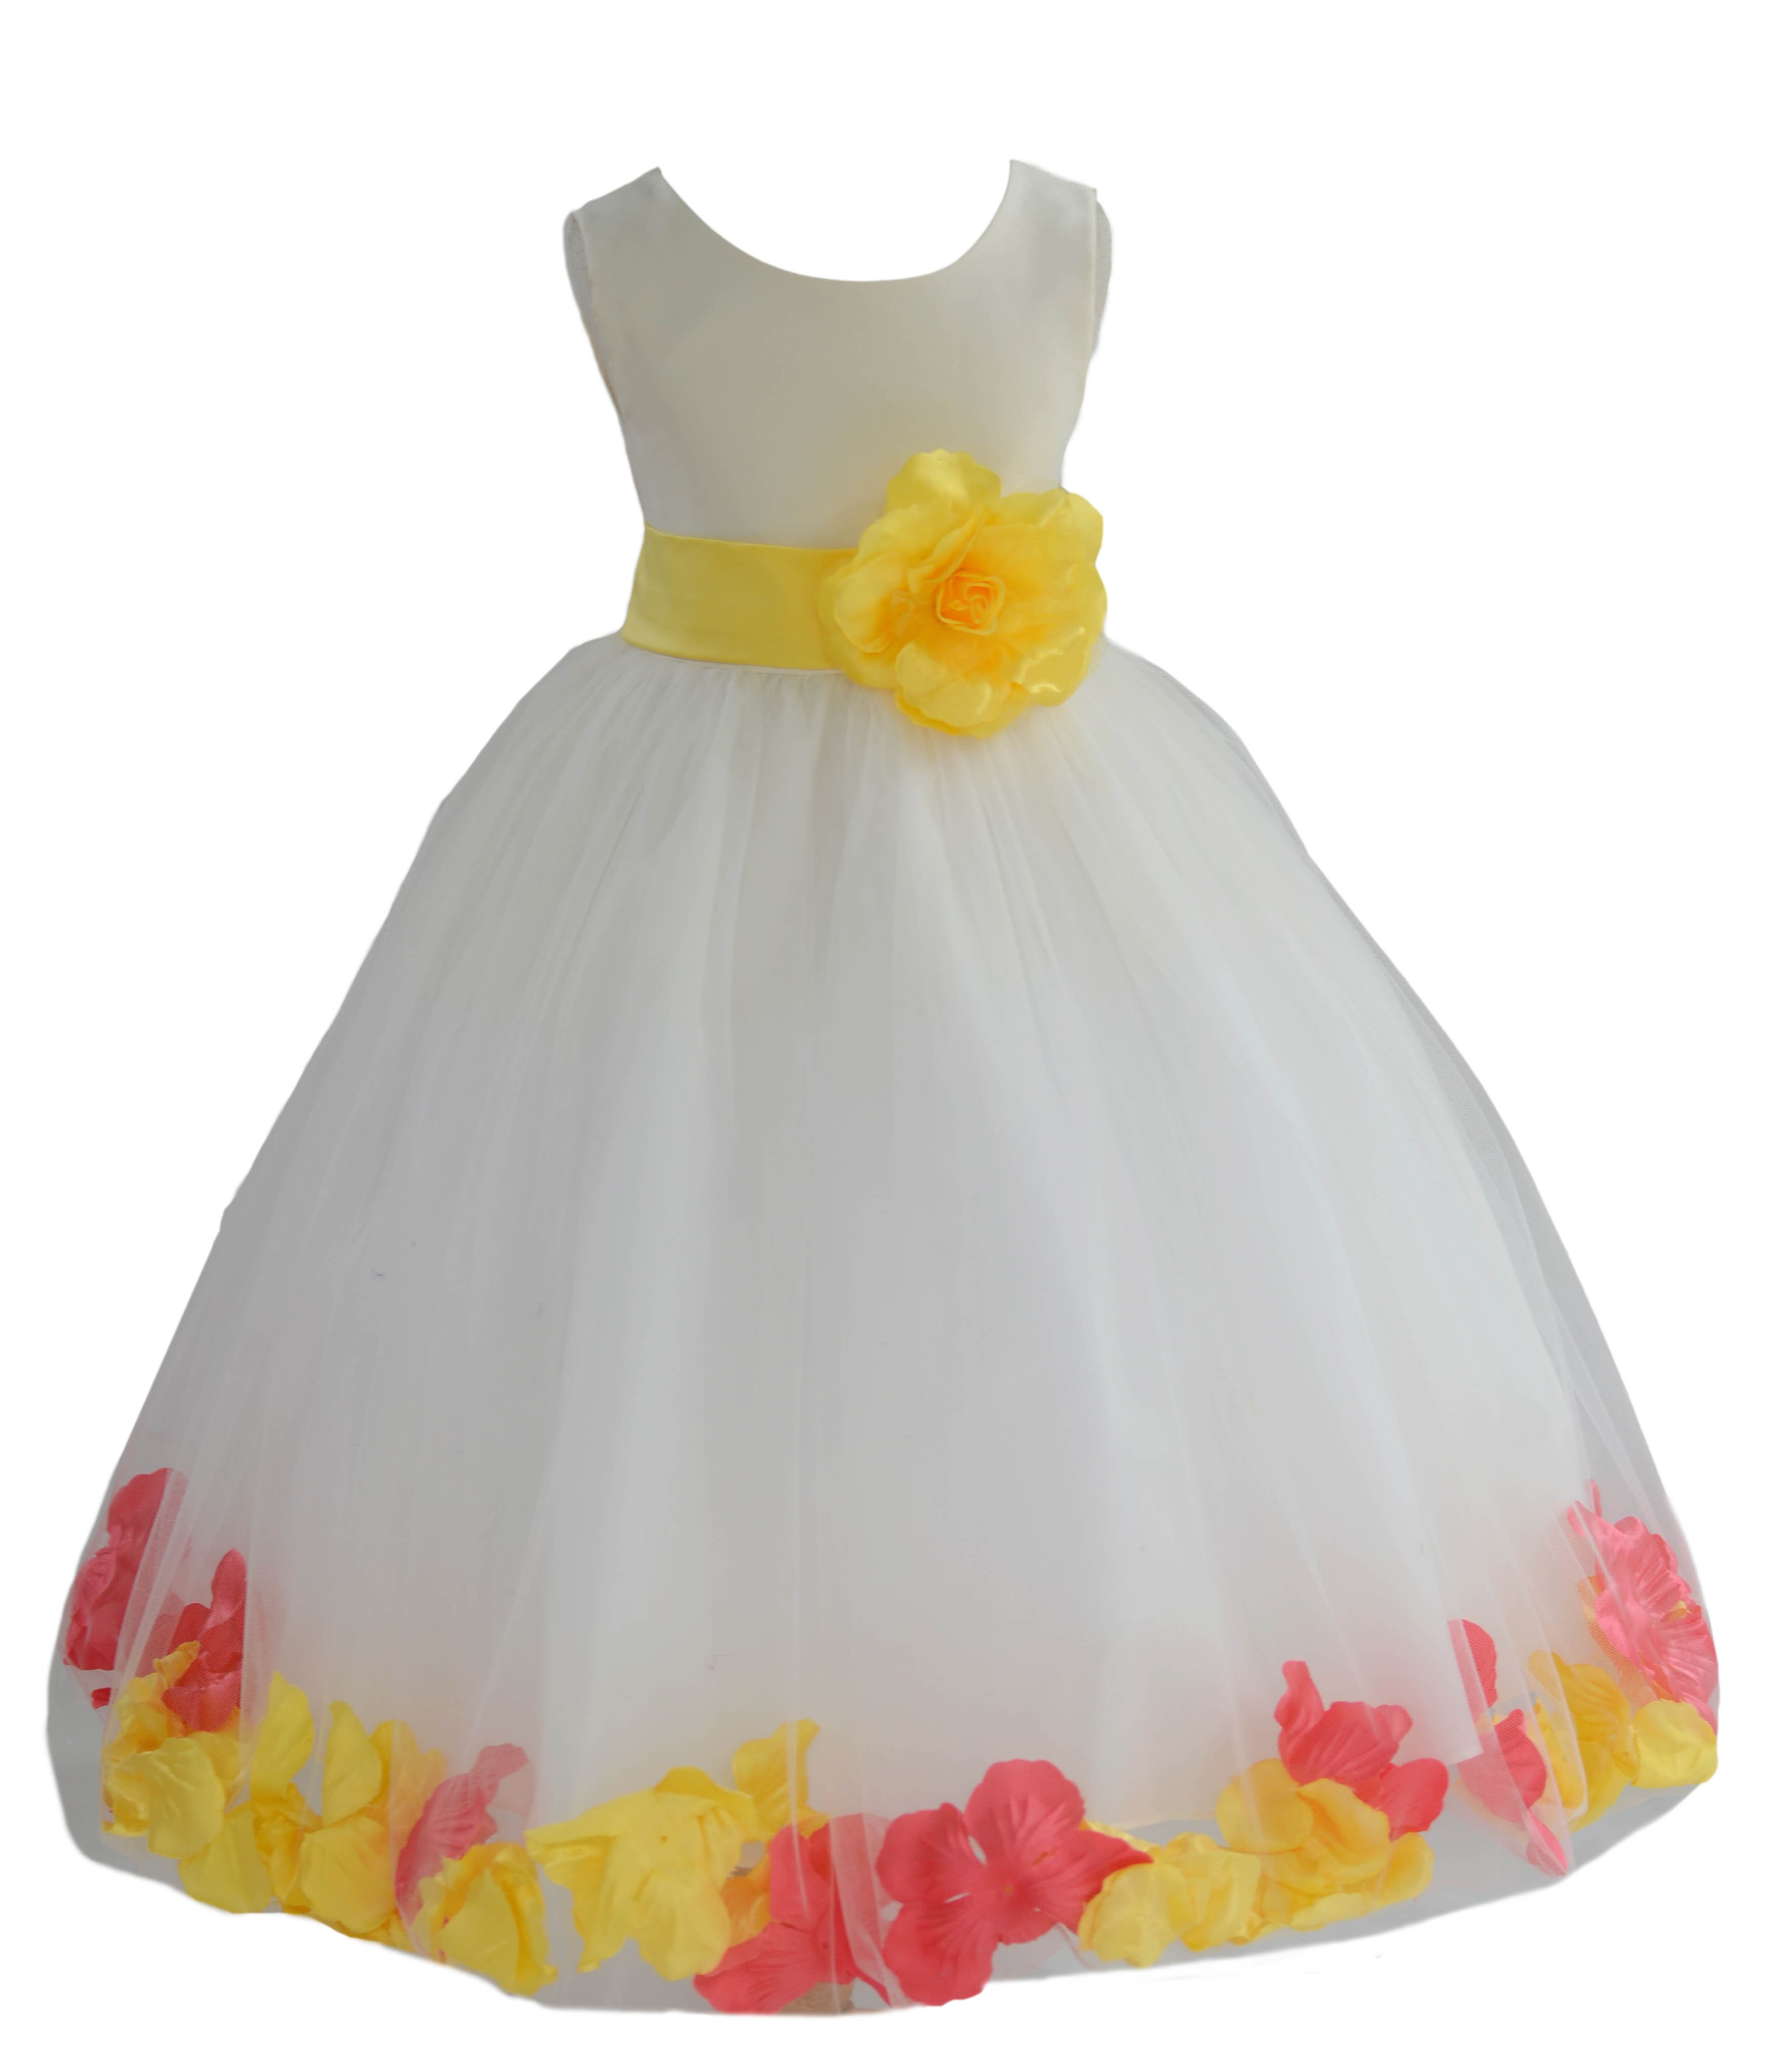 Ivory/Sunbeam-Coral Tulle Mixed Rose Petals Flower Girl Dress 302T